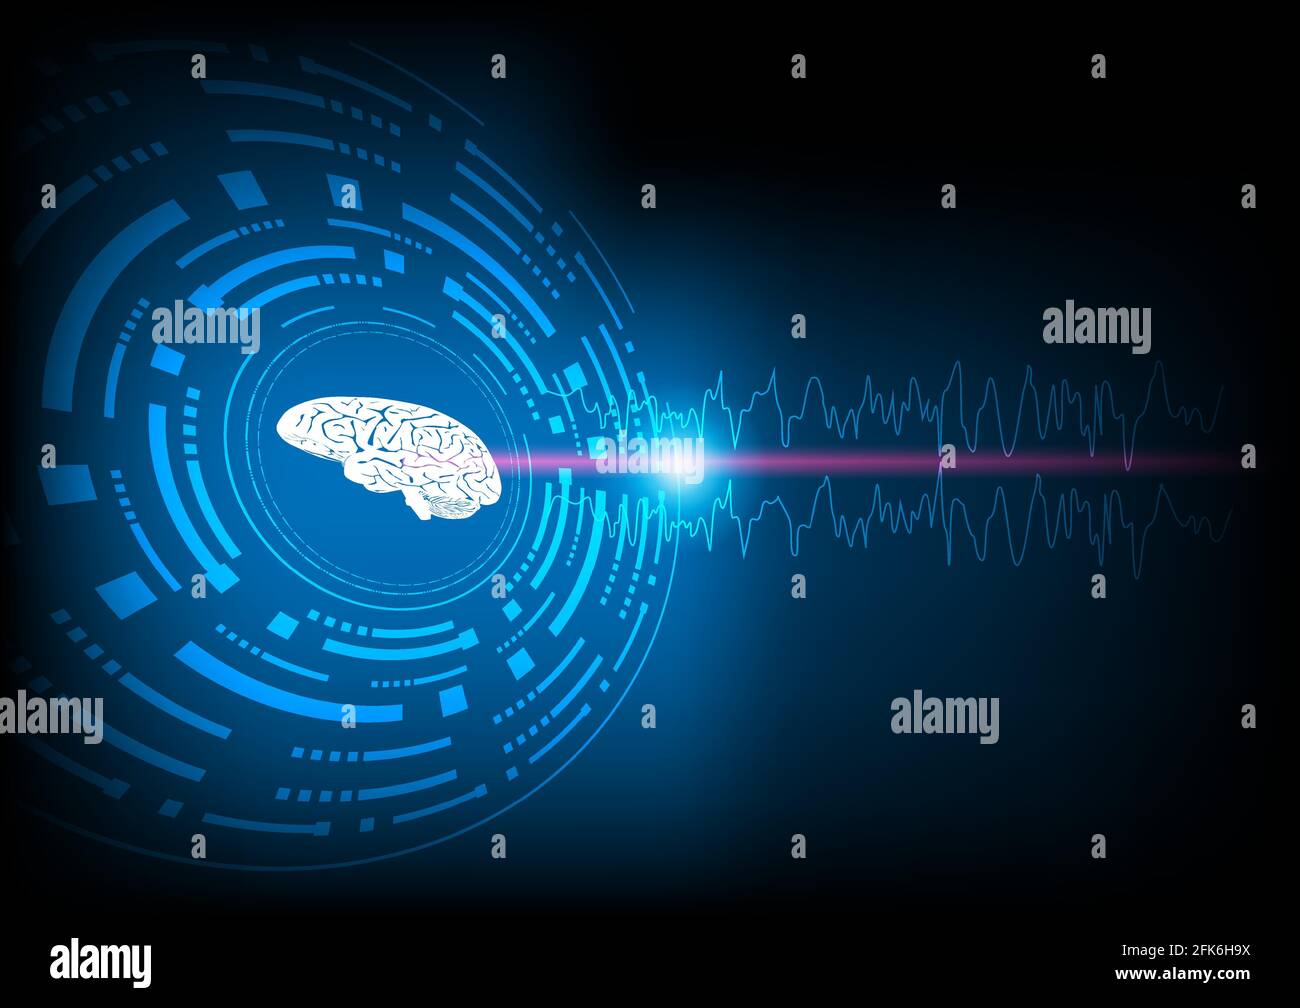 Focal seizure. Illustration of human brain and electroencephalograhy or EEG originating from one regional onset. Technology background. Stock Vector